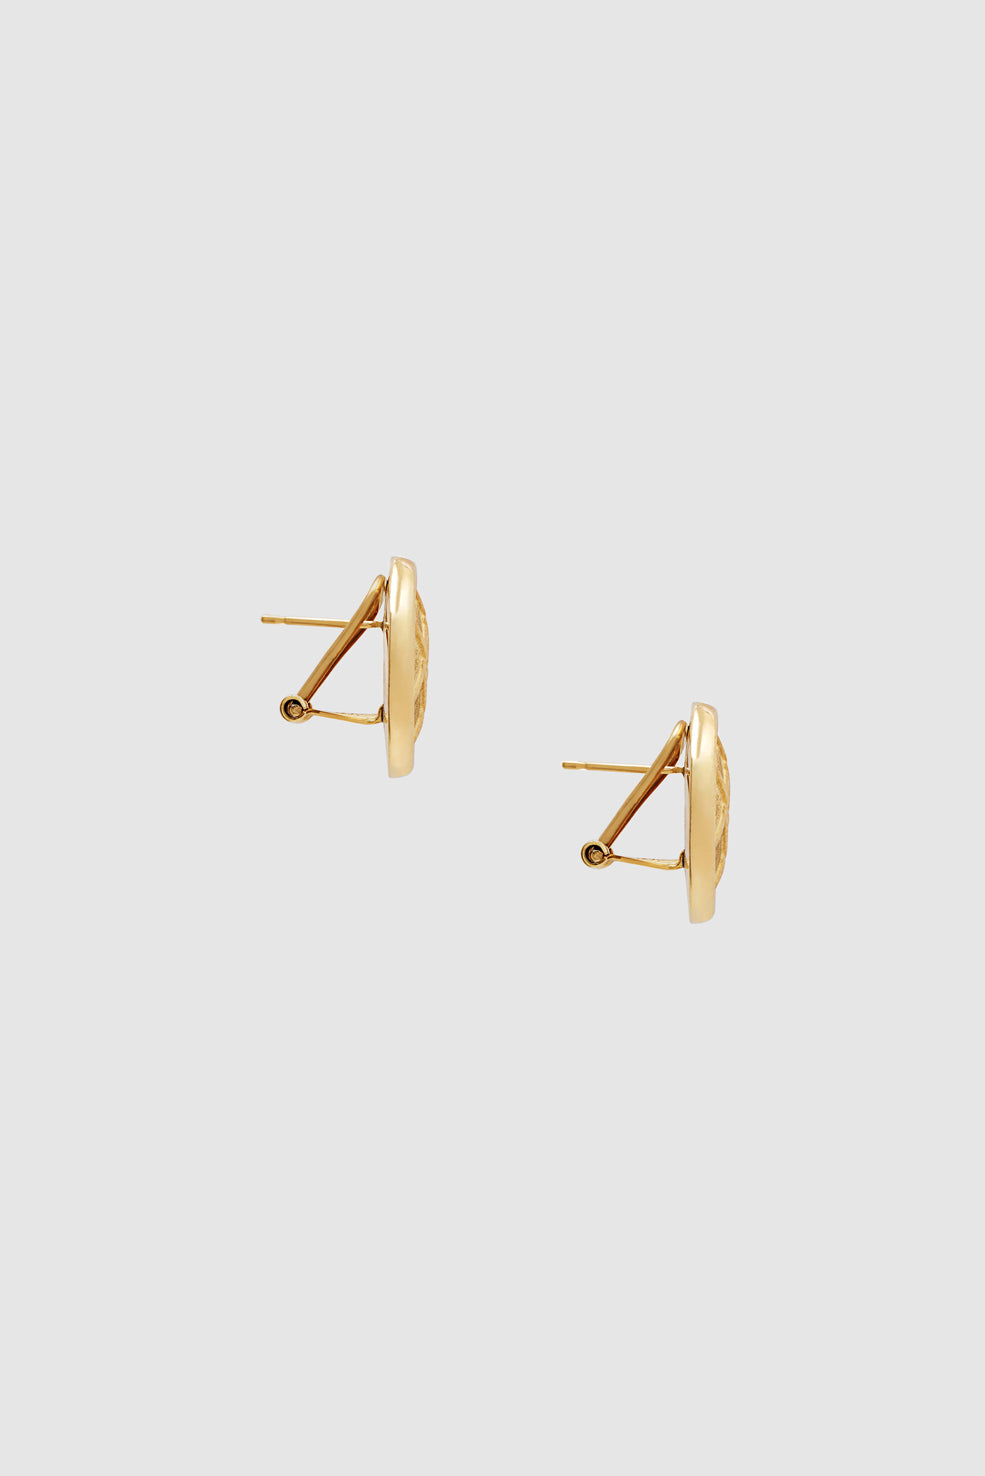 ANINE BING Textured Button Stud Earrings - 14K Gold - Side View